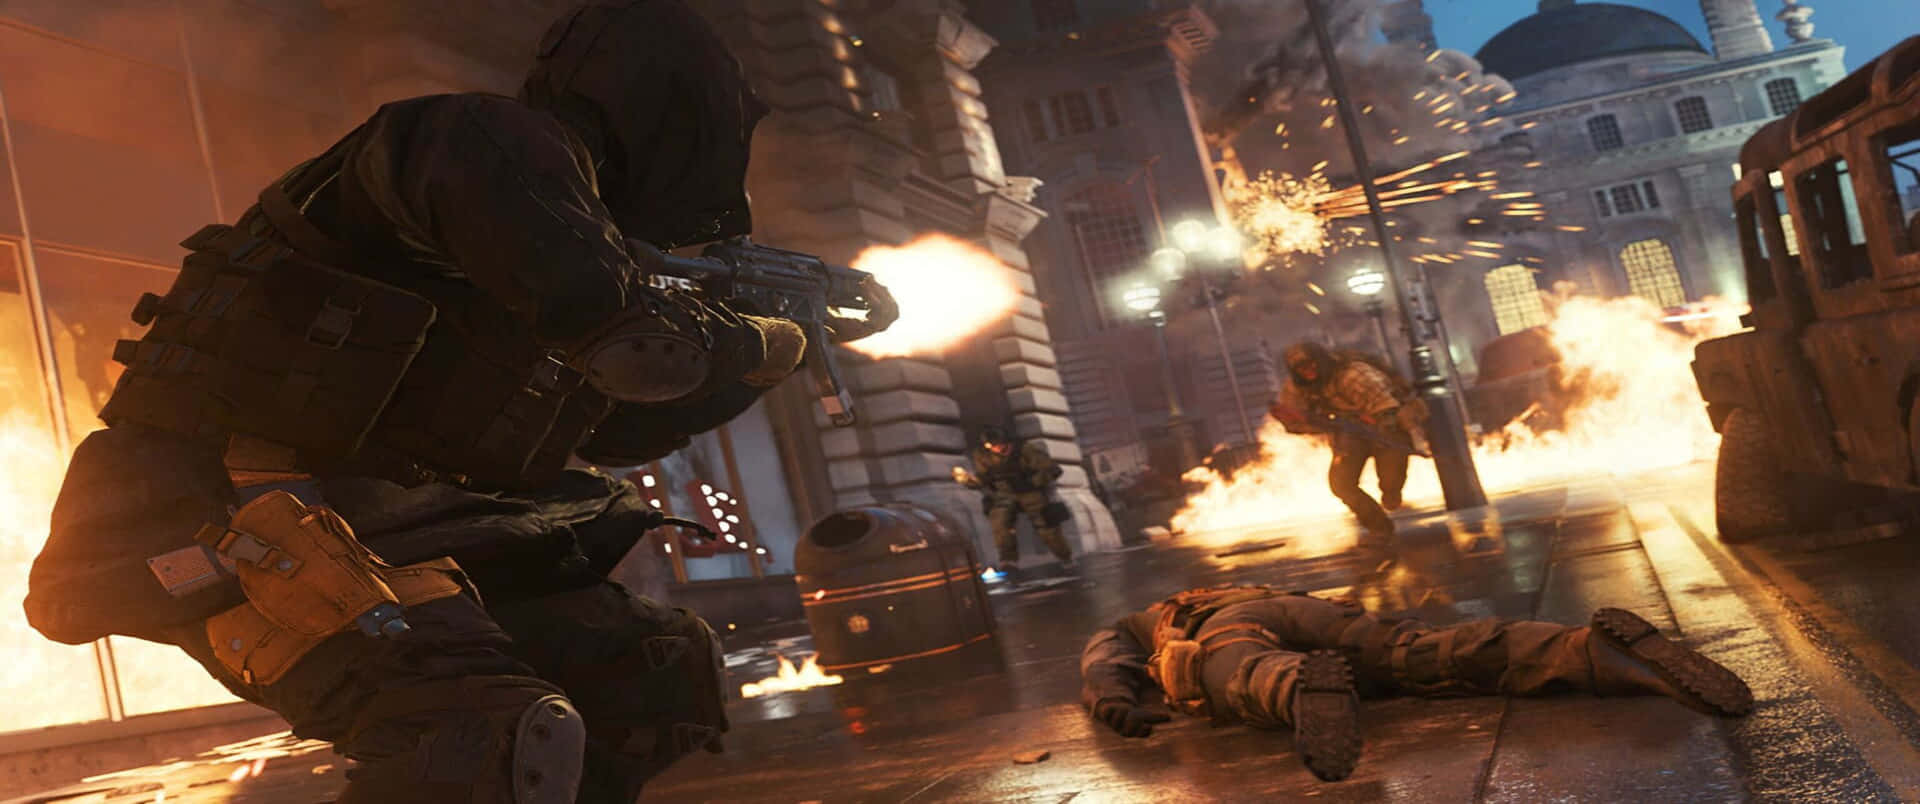 Soldier Shooting Enemy 3440x1440p Call Of Duty Modern Warfare Background